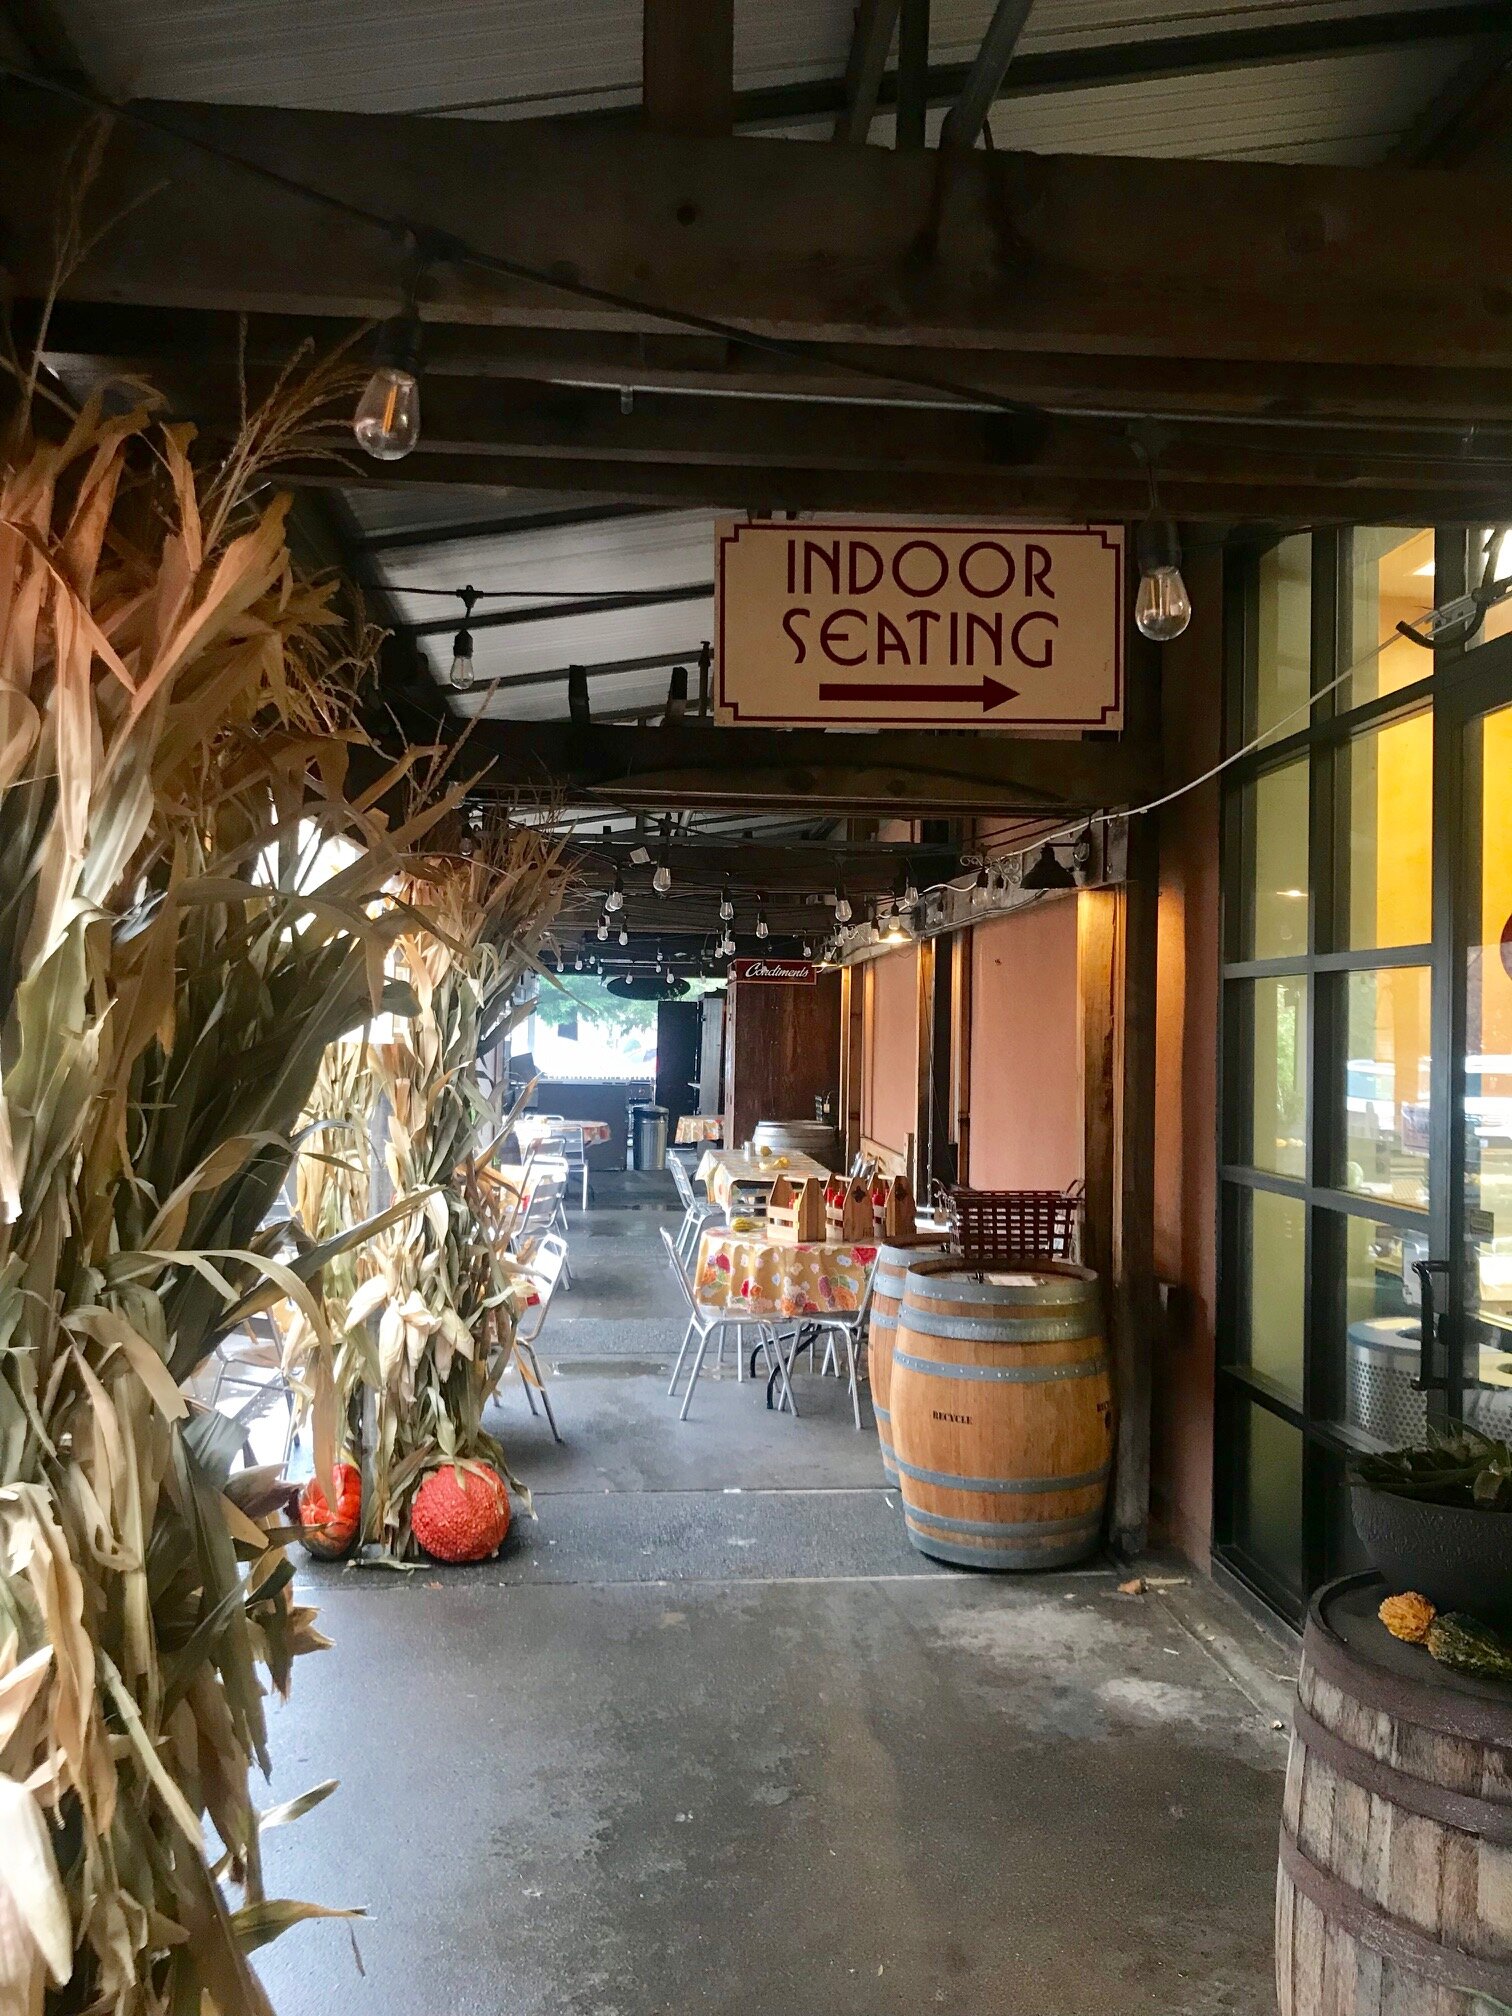 Muir Woods, Sonoma &amp; Napa Valley Tour Review with Extranomical Tours - Sonoma Wine Country Plaza